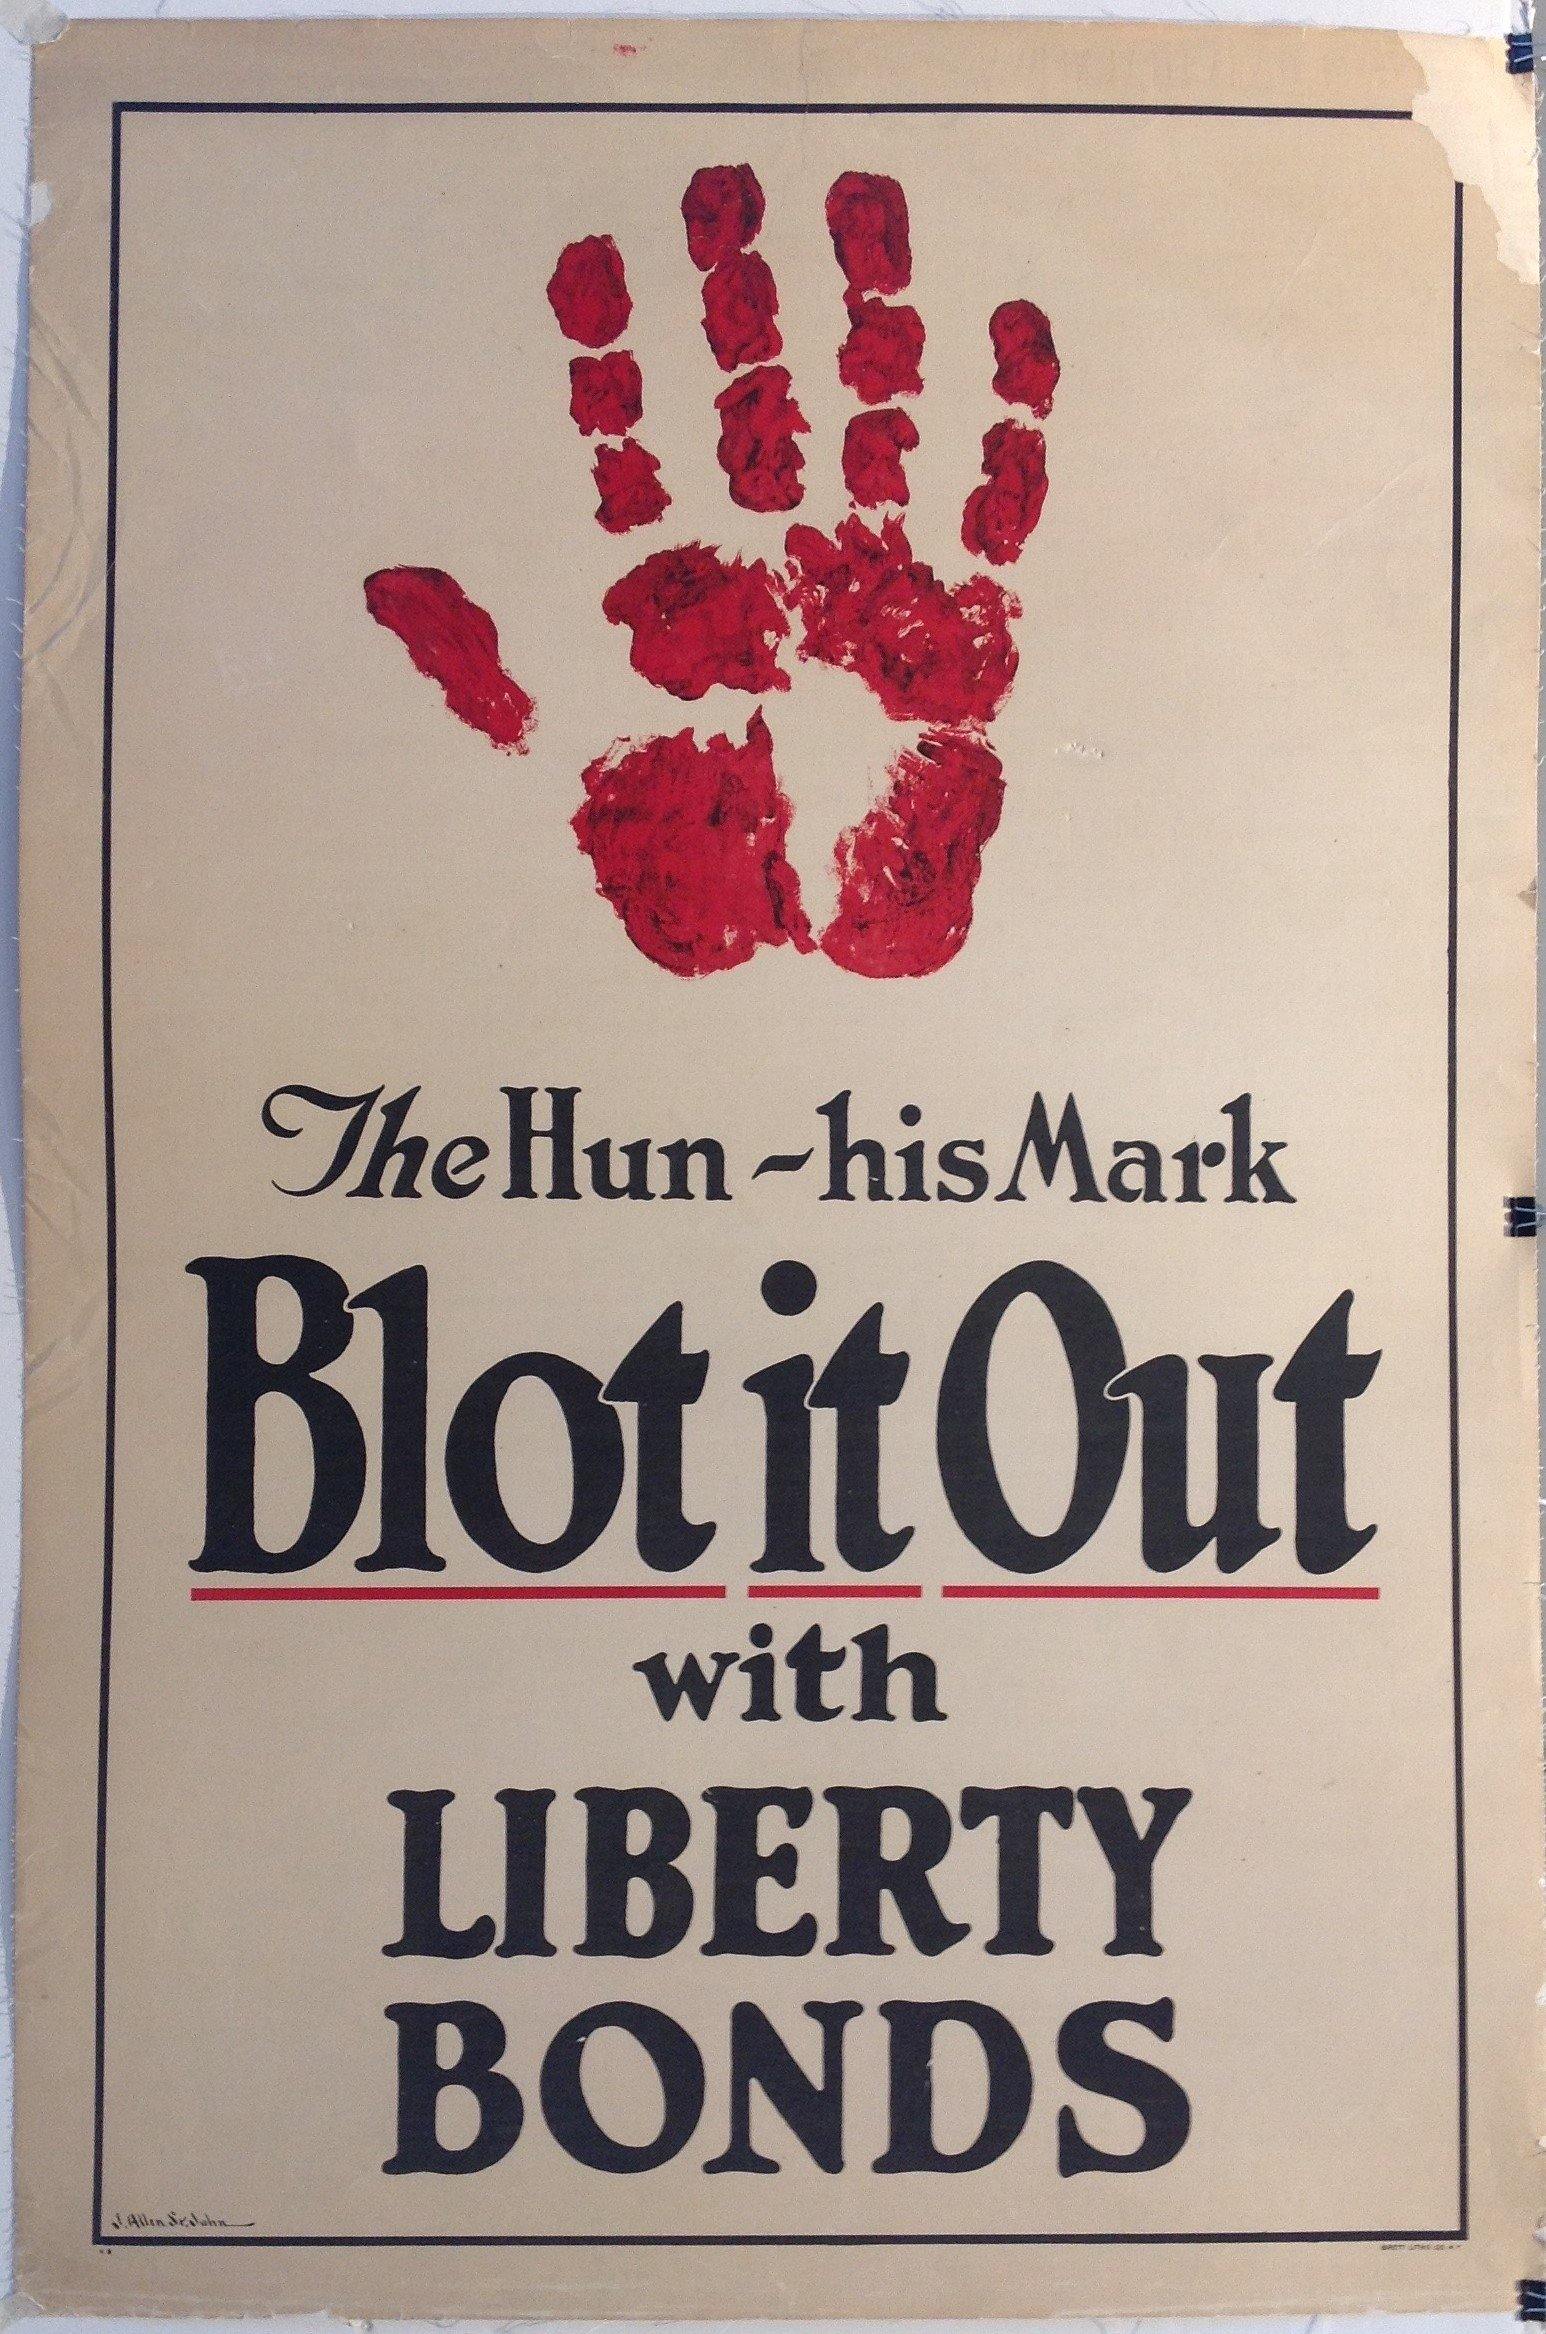 The Hun - his Mark "Blot it Out with Liberty Bonds" - Poster Museum